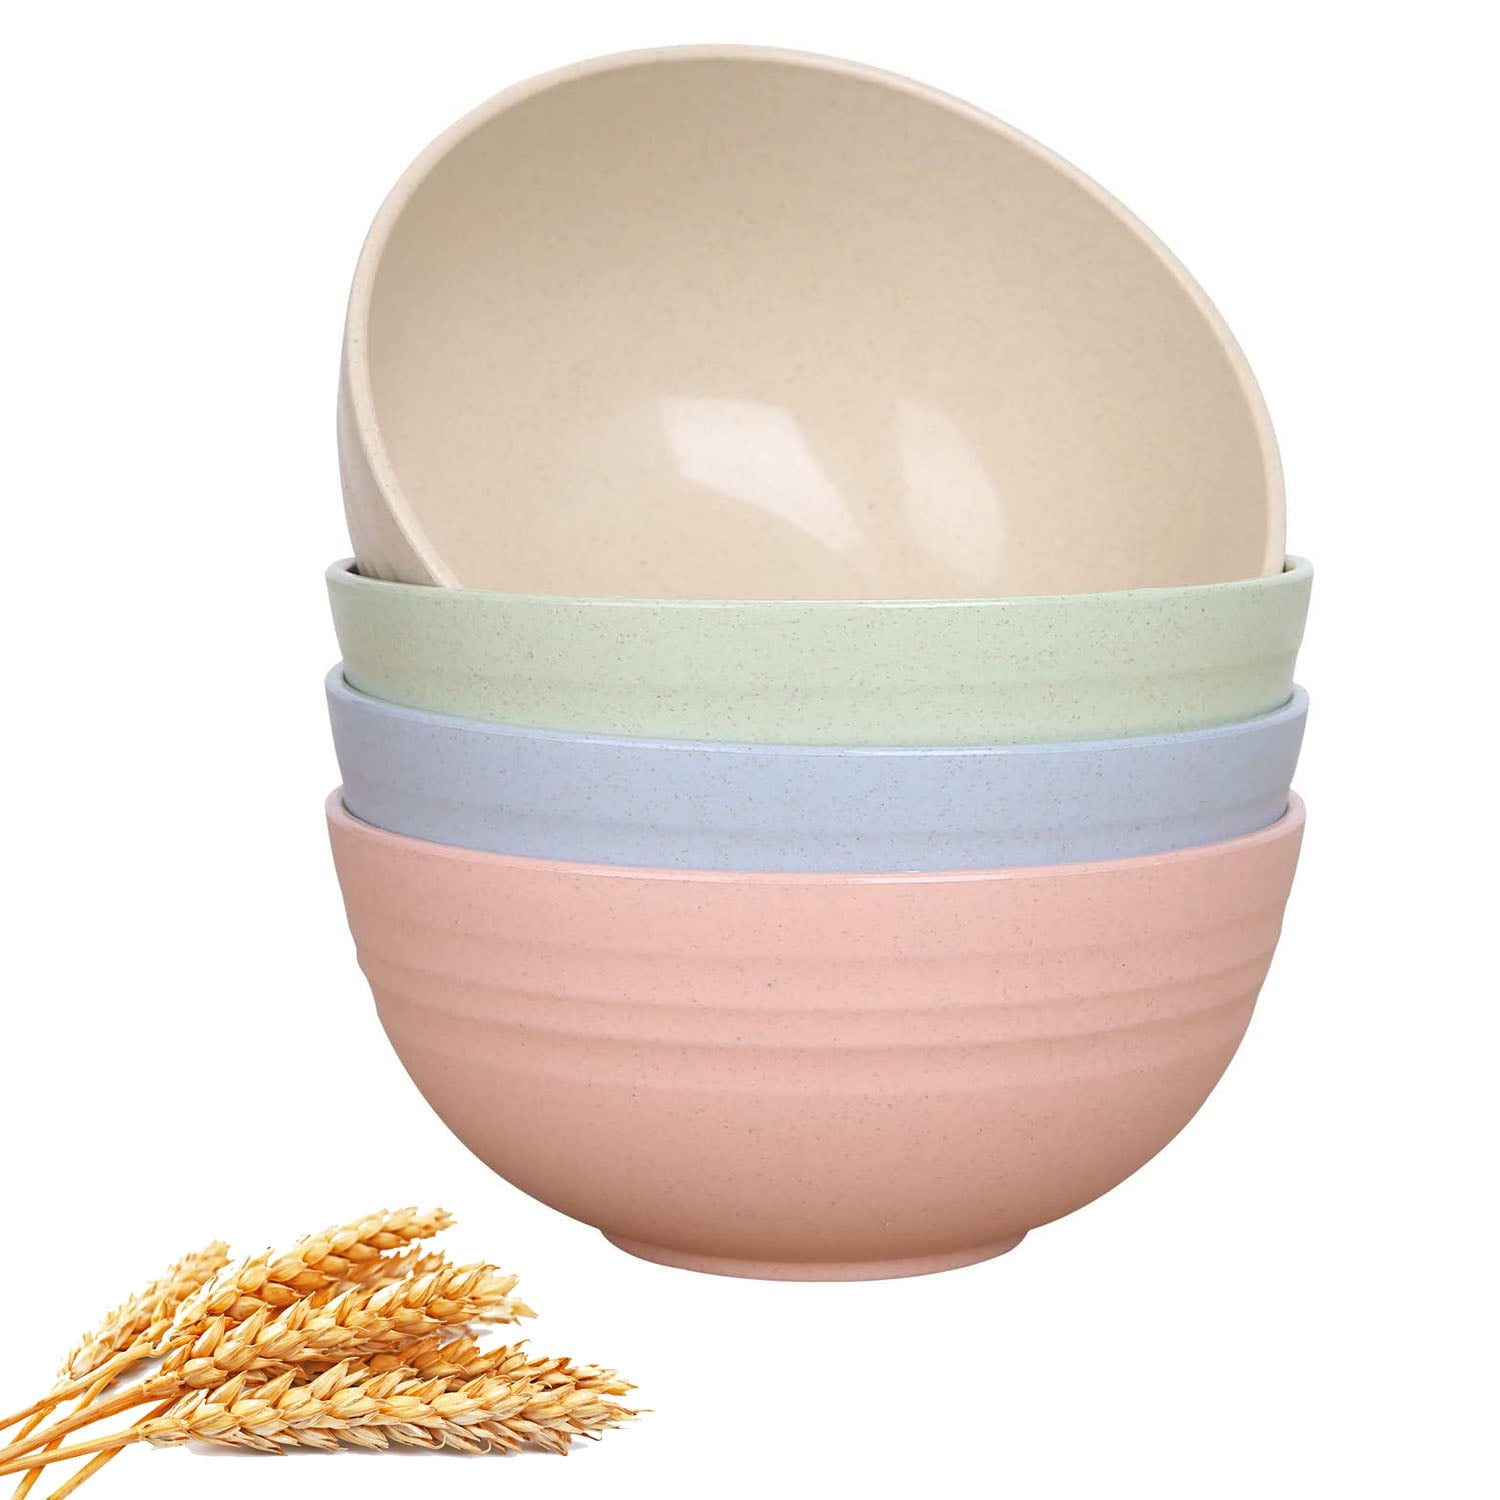 Cereal Bowls, Petal-Shaped 18 oz Plastic Bowl, Colorful Wheat Straw Fiber Lightweight Bowls for Children Adult, Dishwasher and Microwave Safe for Rice